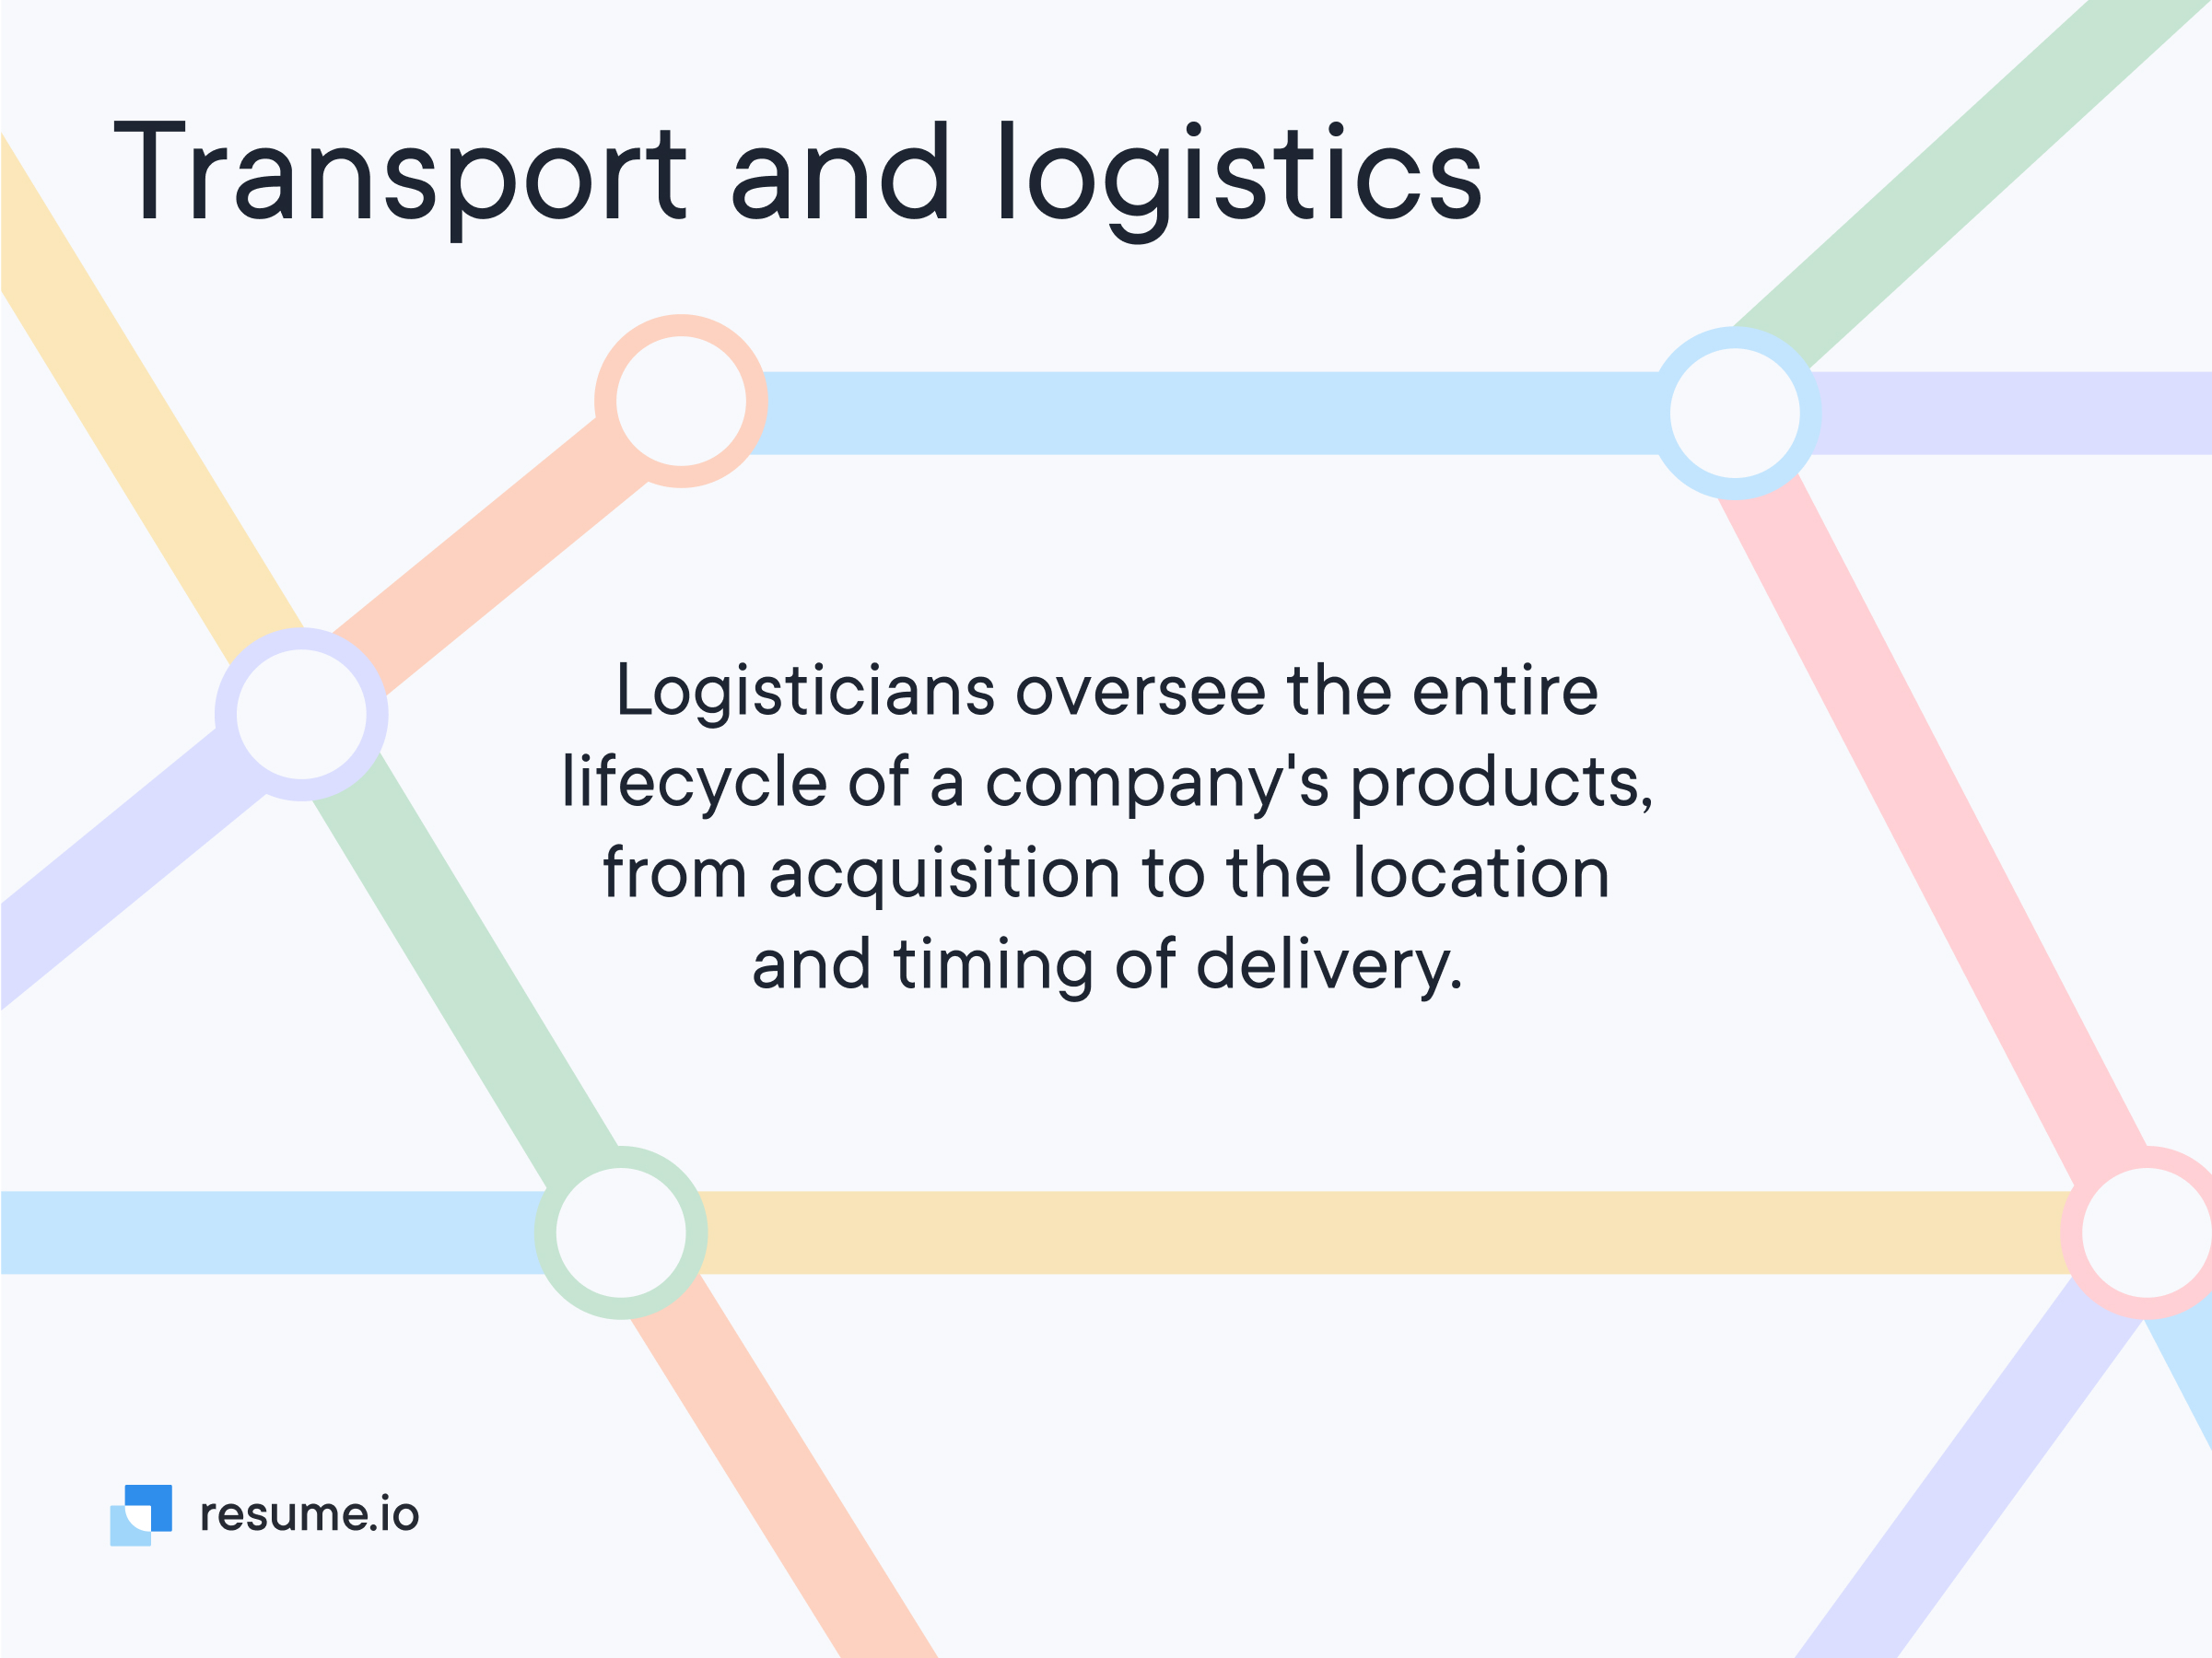 What does a logistician do?